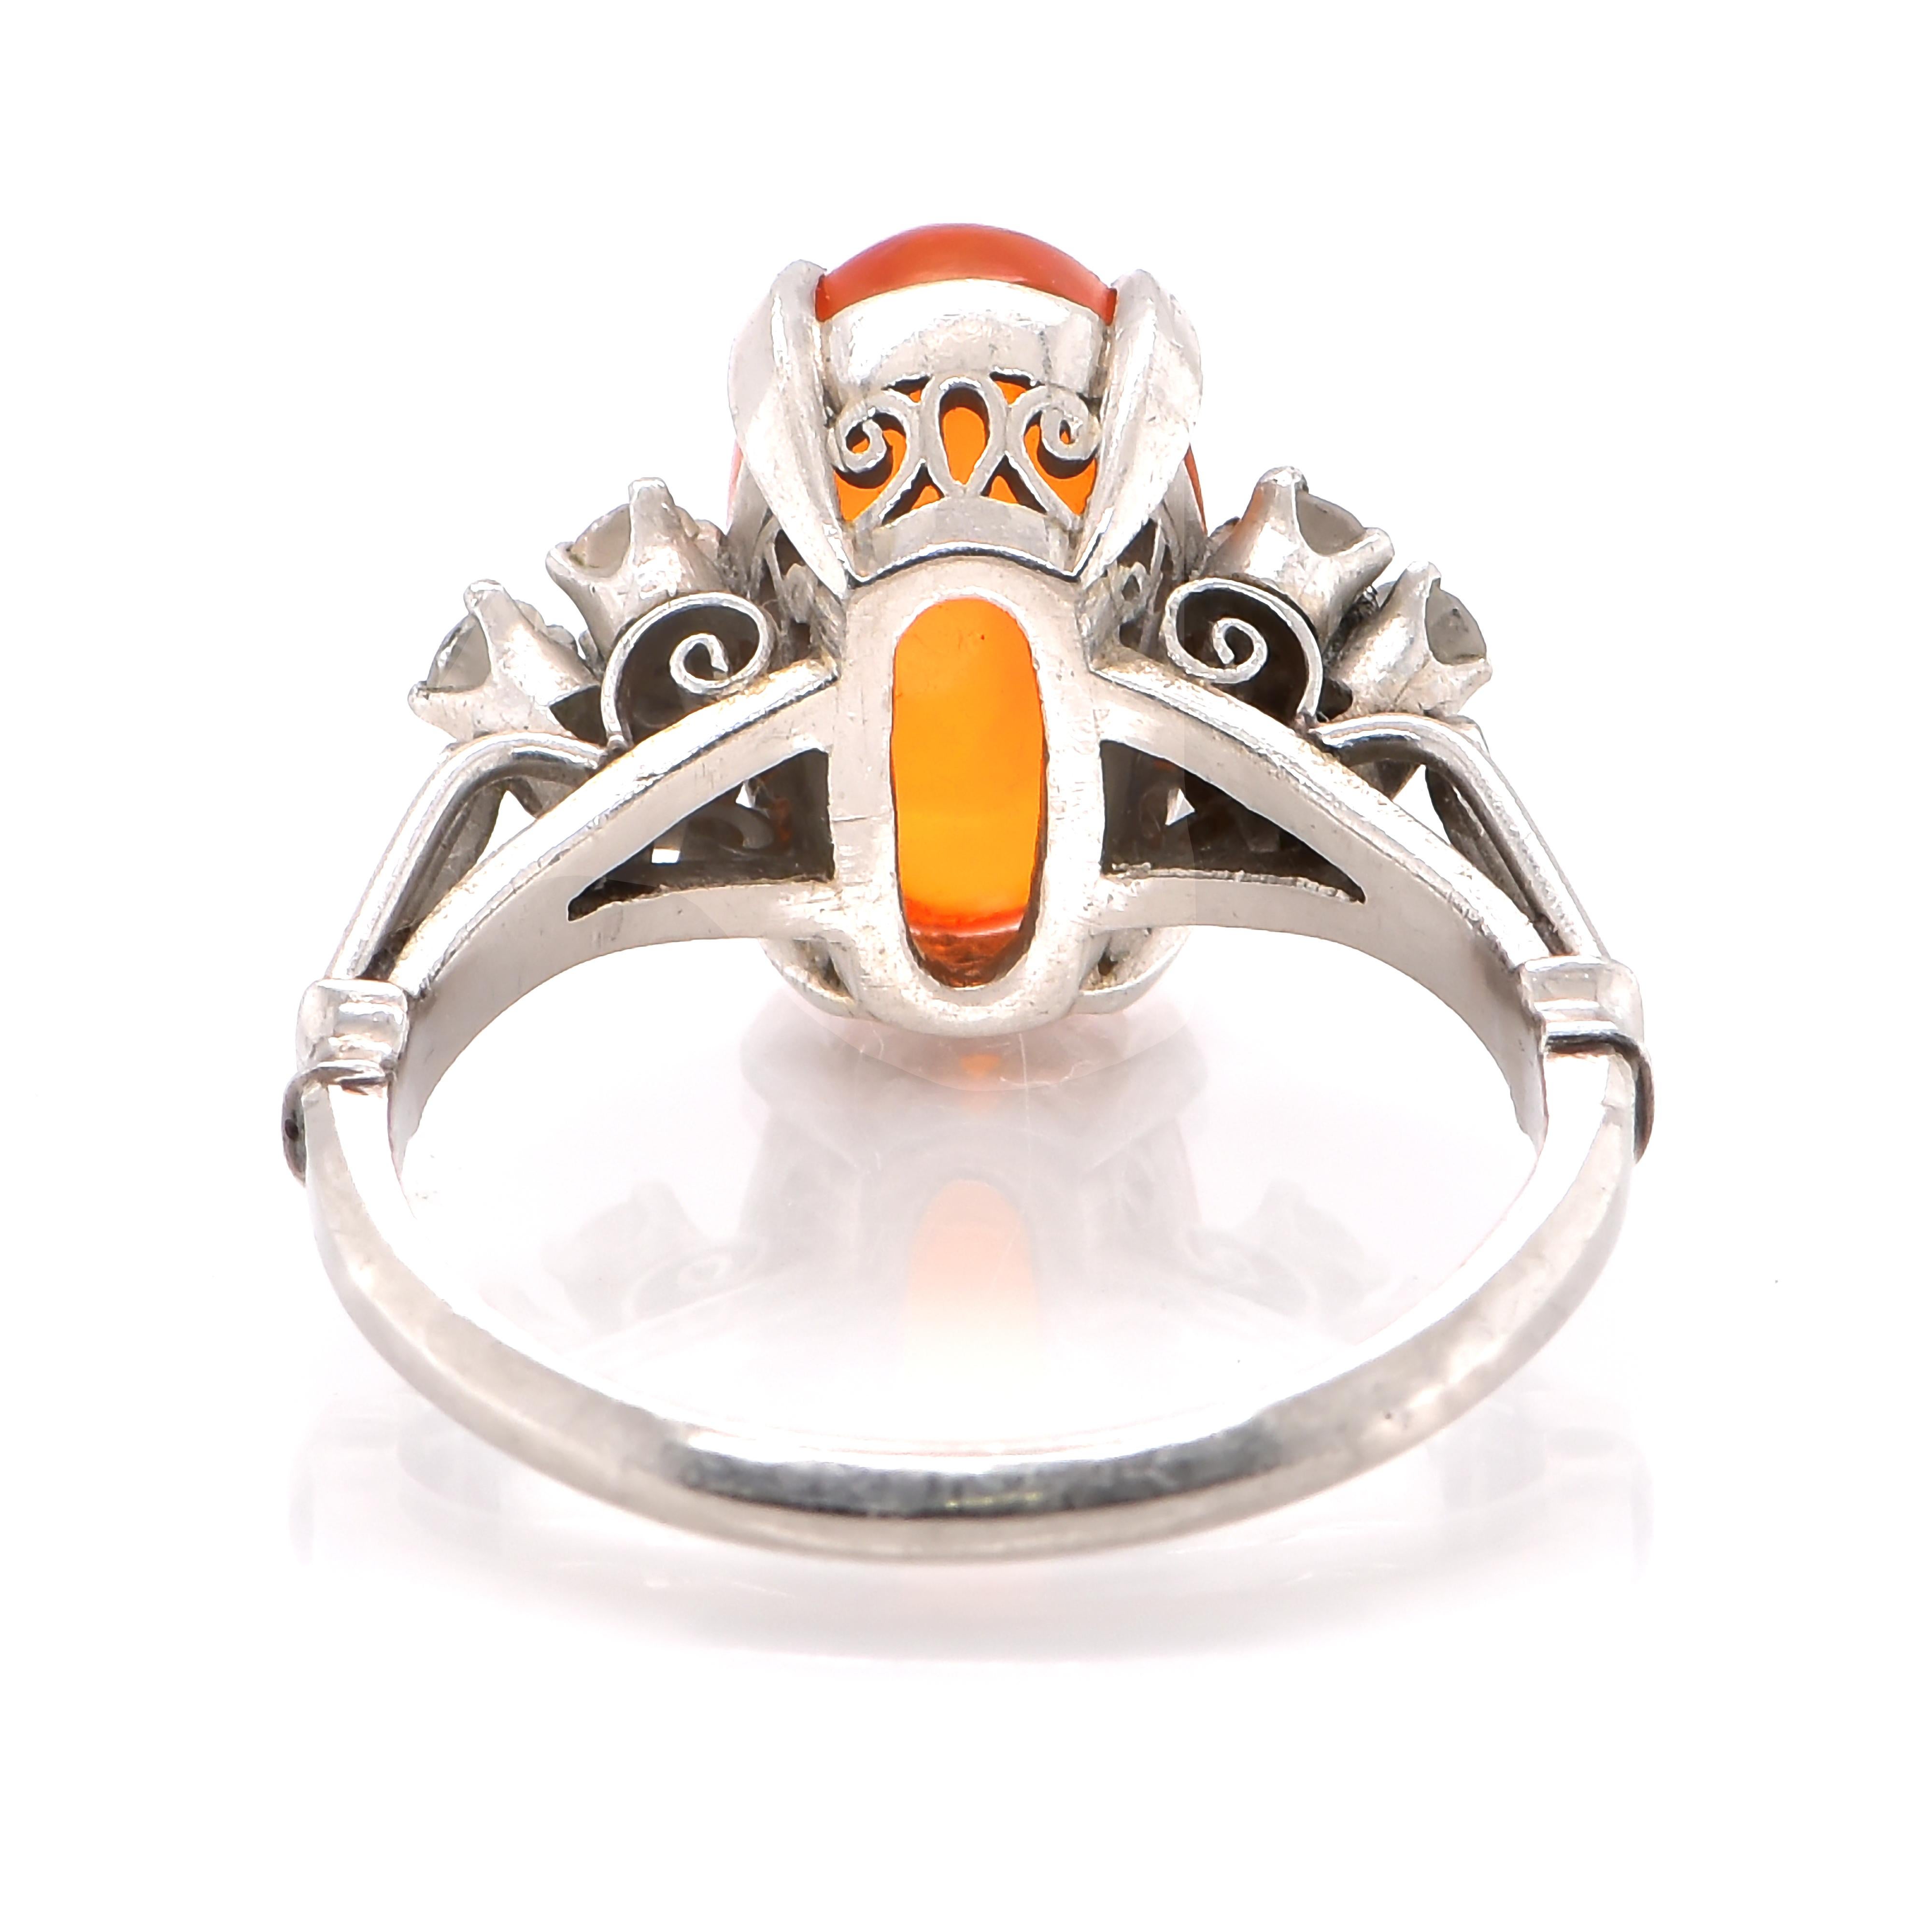 Women's 3.15 Carat Natural Mexican Fire Opal and Diamond Estate Ring Made in Platinum For Sale